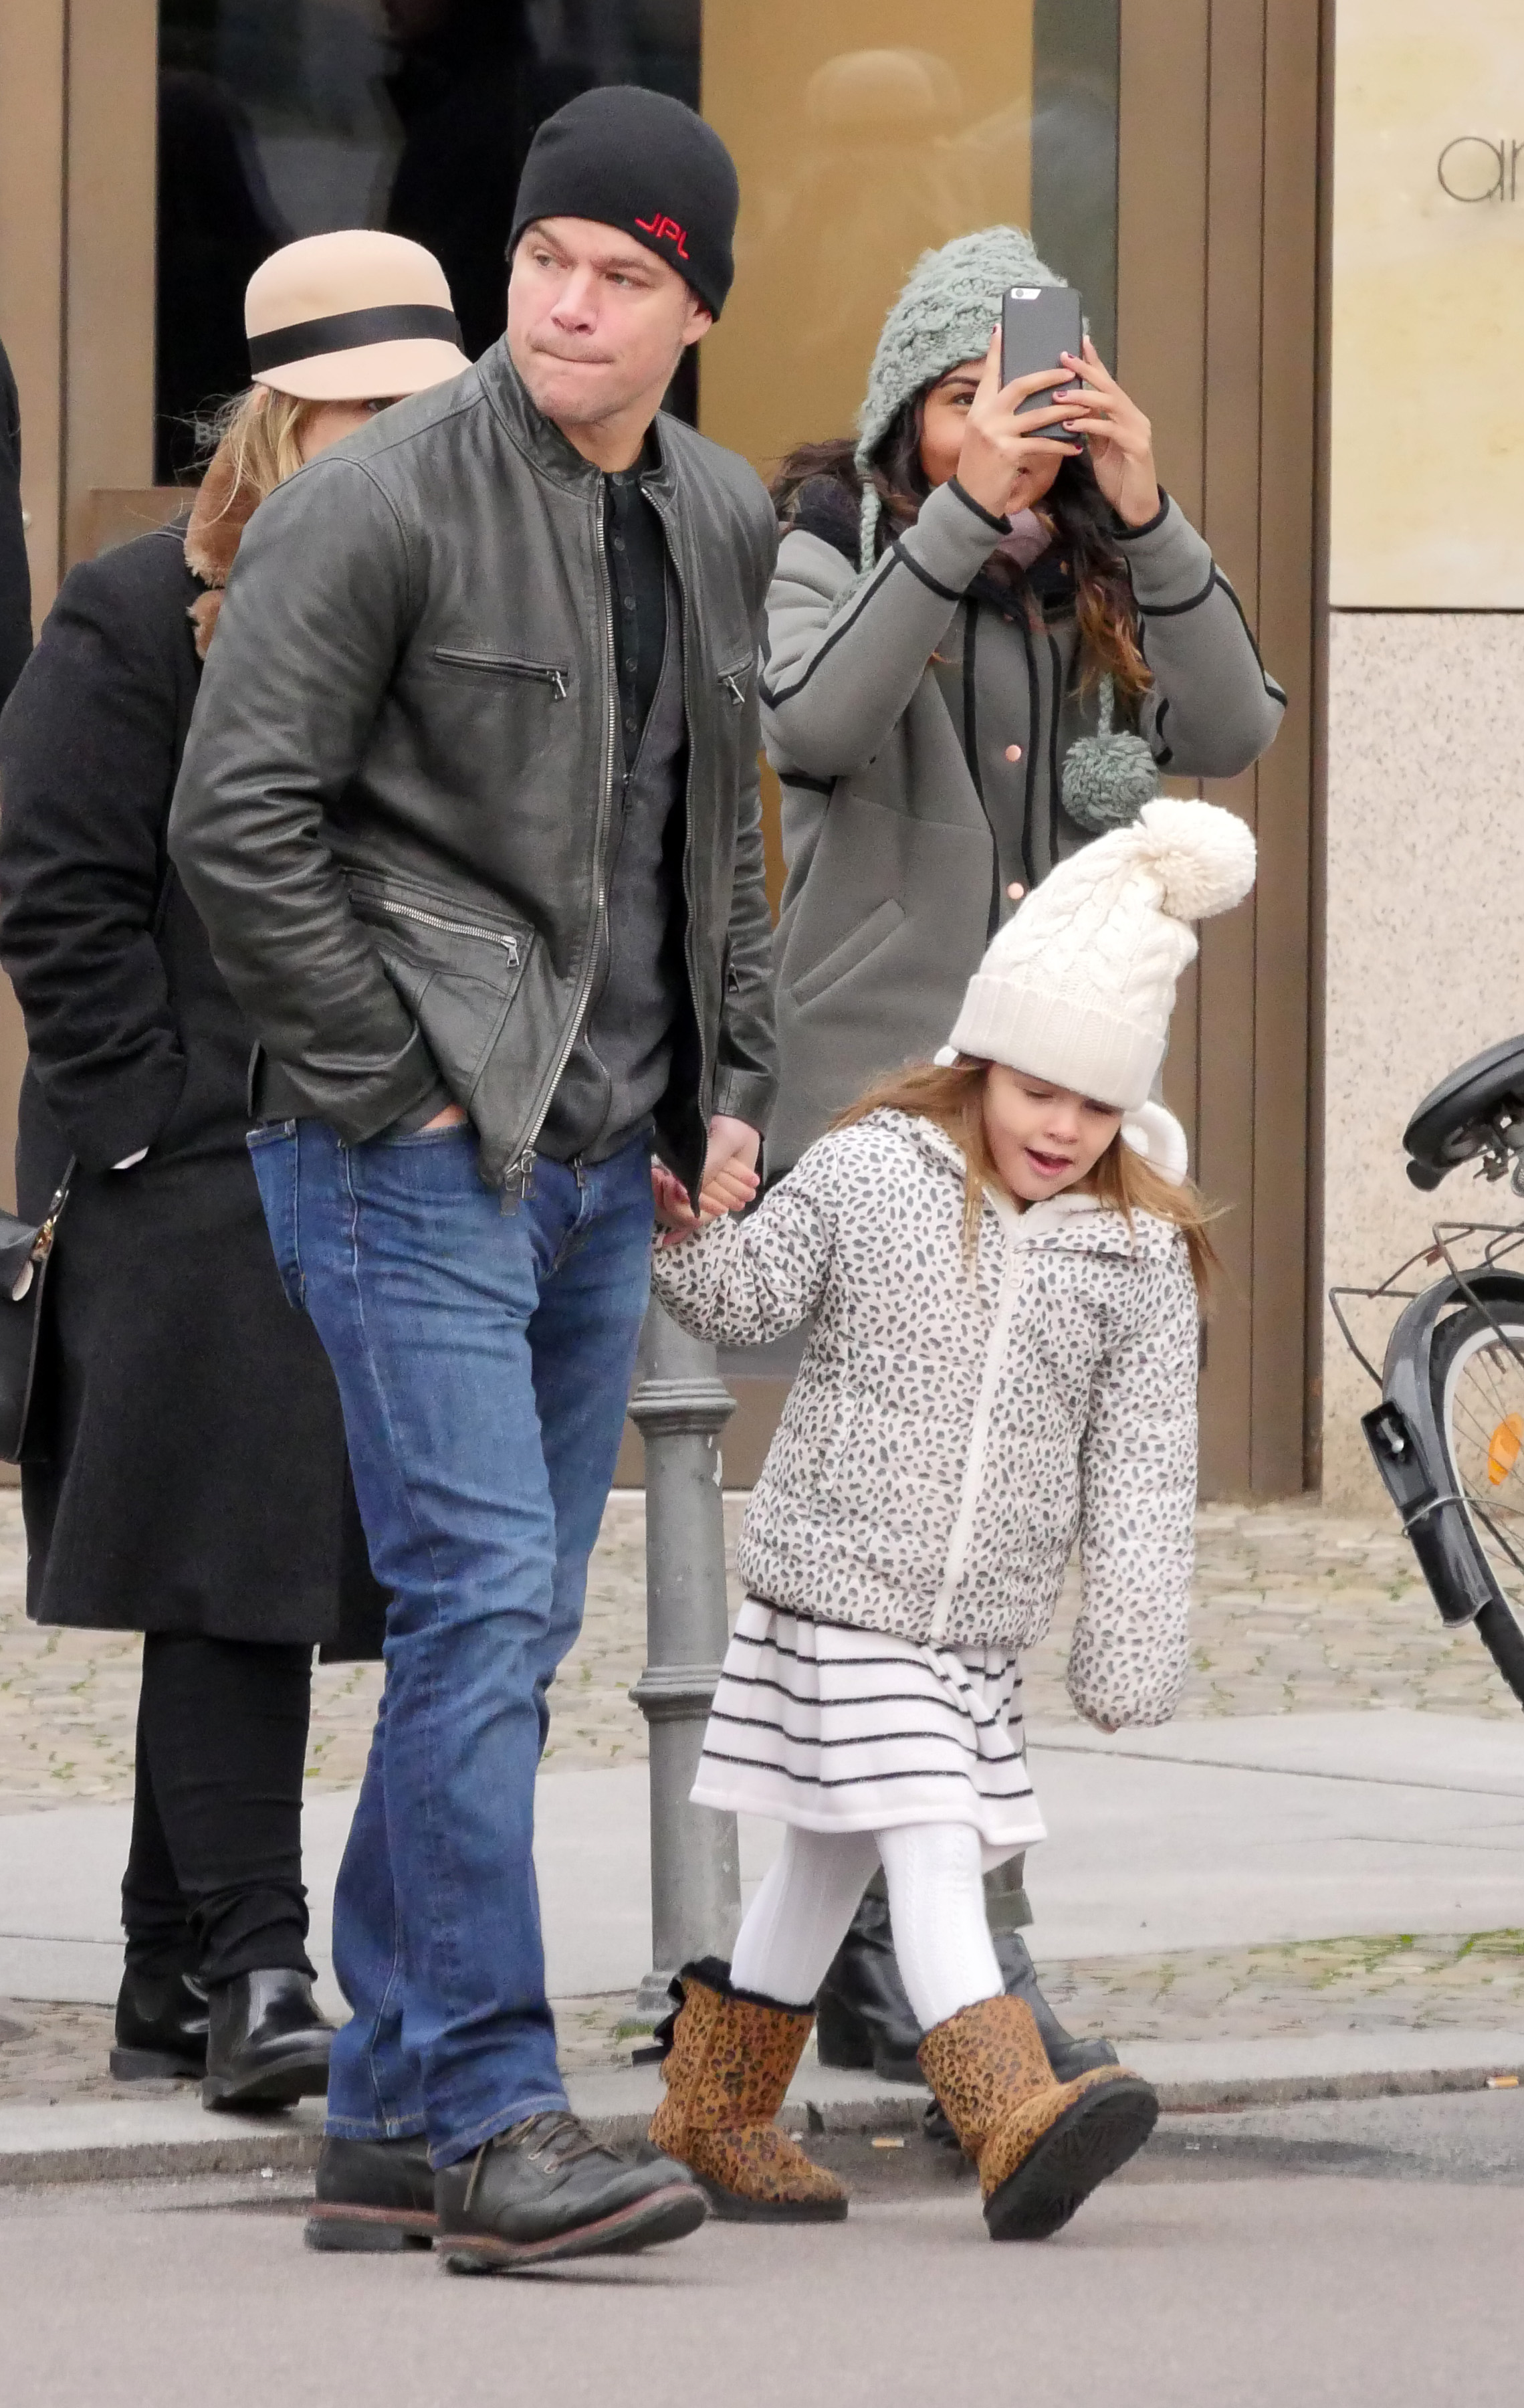 Matt Damon and his family sighted walking in Berlin-Mitte on November 22, 2015 in Berlin, Germany | Source: Getty Images